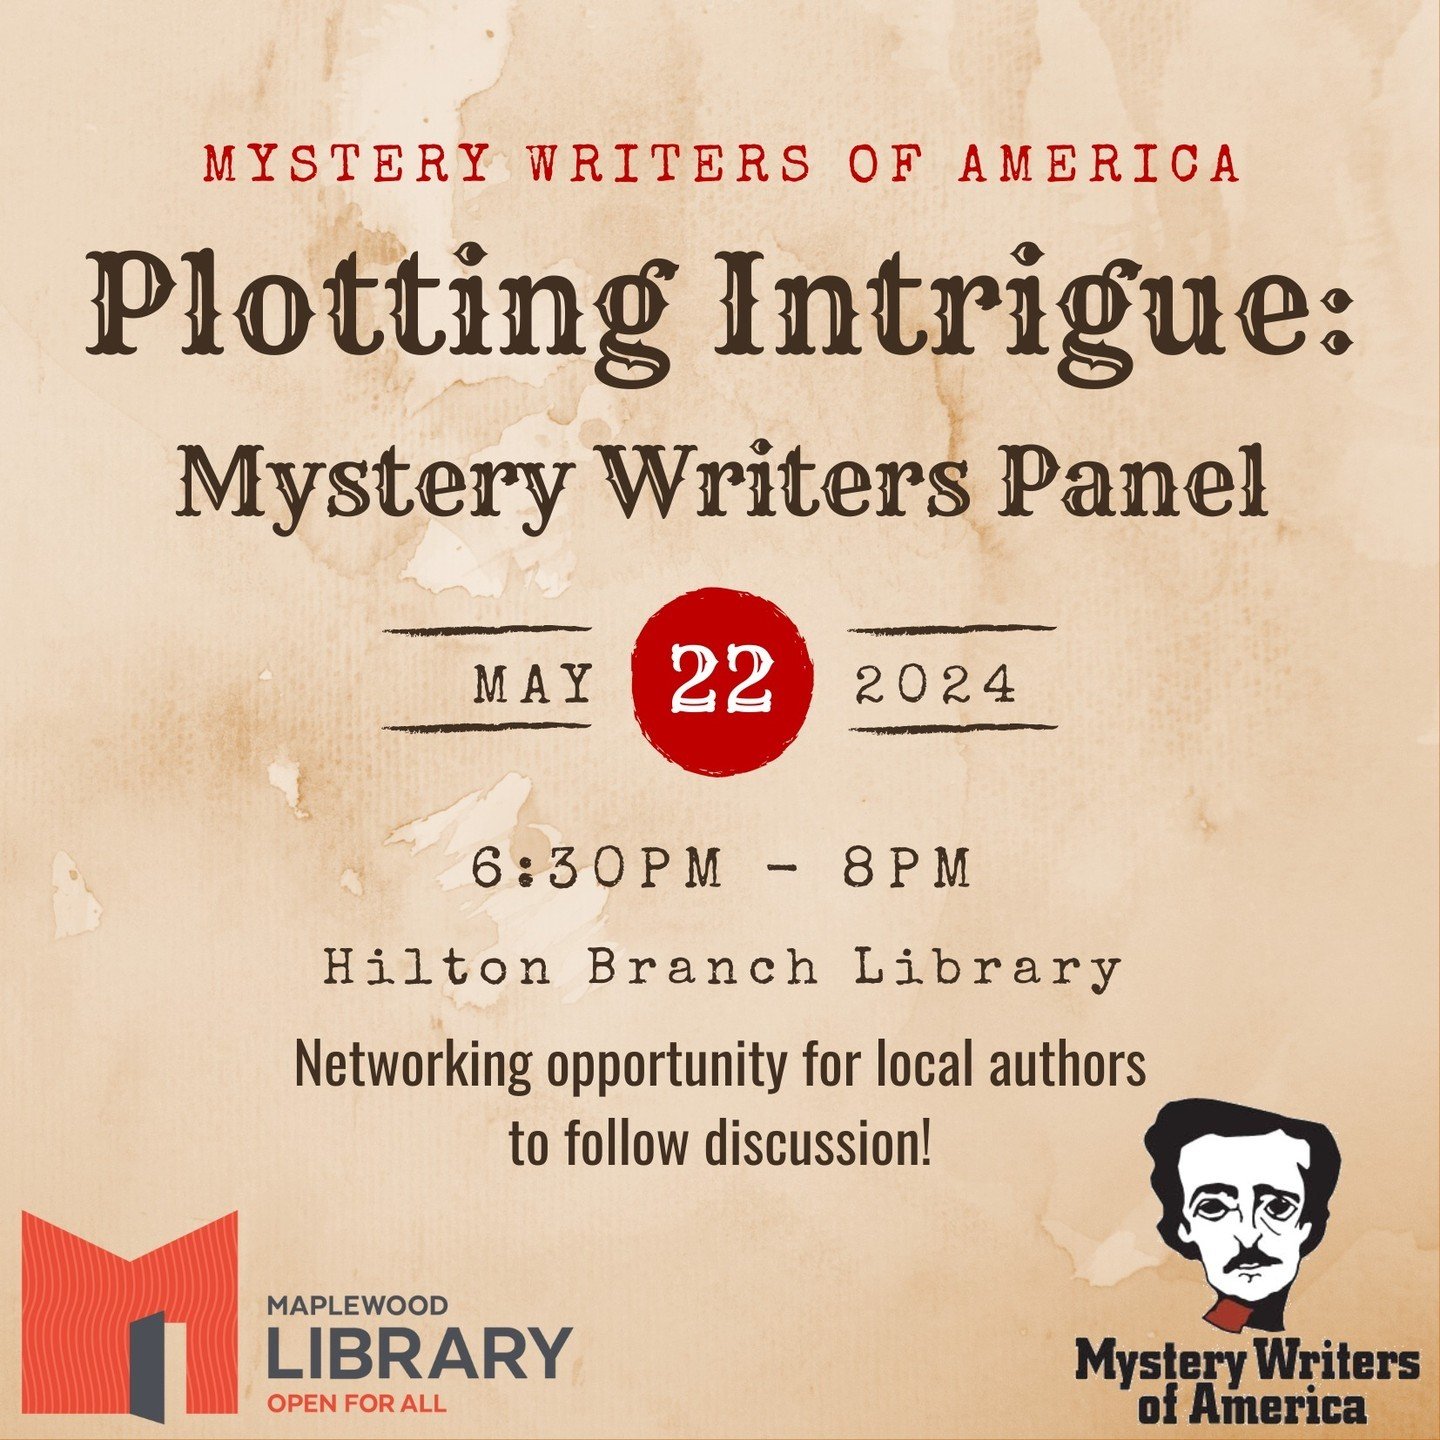 Plotting Intrigue: Mystery Writers Panel with Mystery Writers of America⁠
📅 Wednesday, May 22⁠
🕡️ 6;30PM - 8PM⁠
📍 Hilton Branch Library⁠
⁠
Join us for an exploration into the minds of mystery writers as they unravel the secrets behind crafting cap